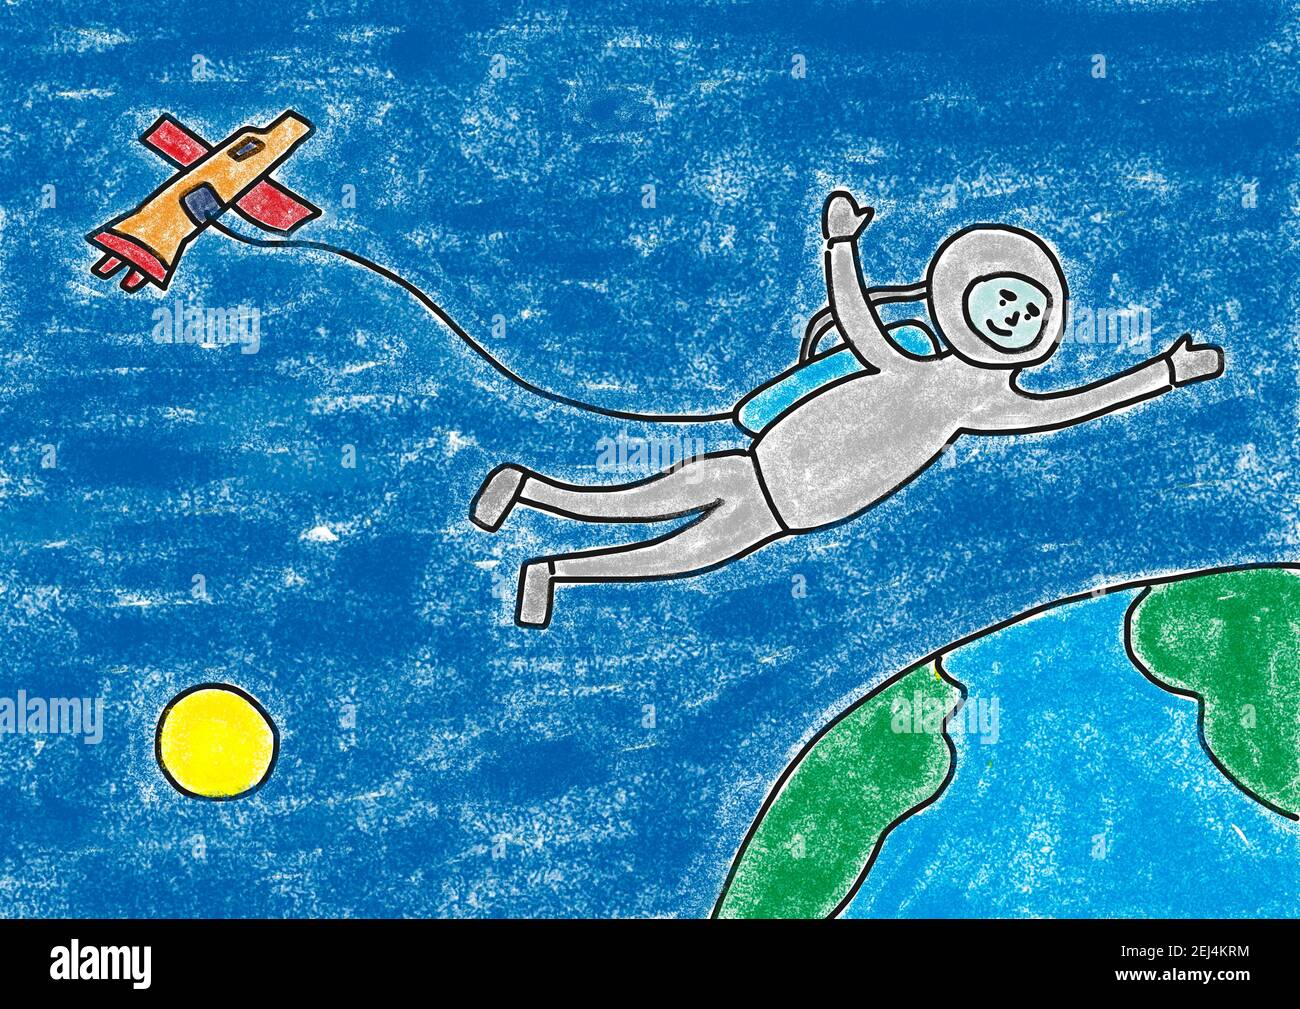 Naive illustration, children drawing, astronaut with spaceship floats over earth, Austria Stock Photo